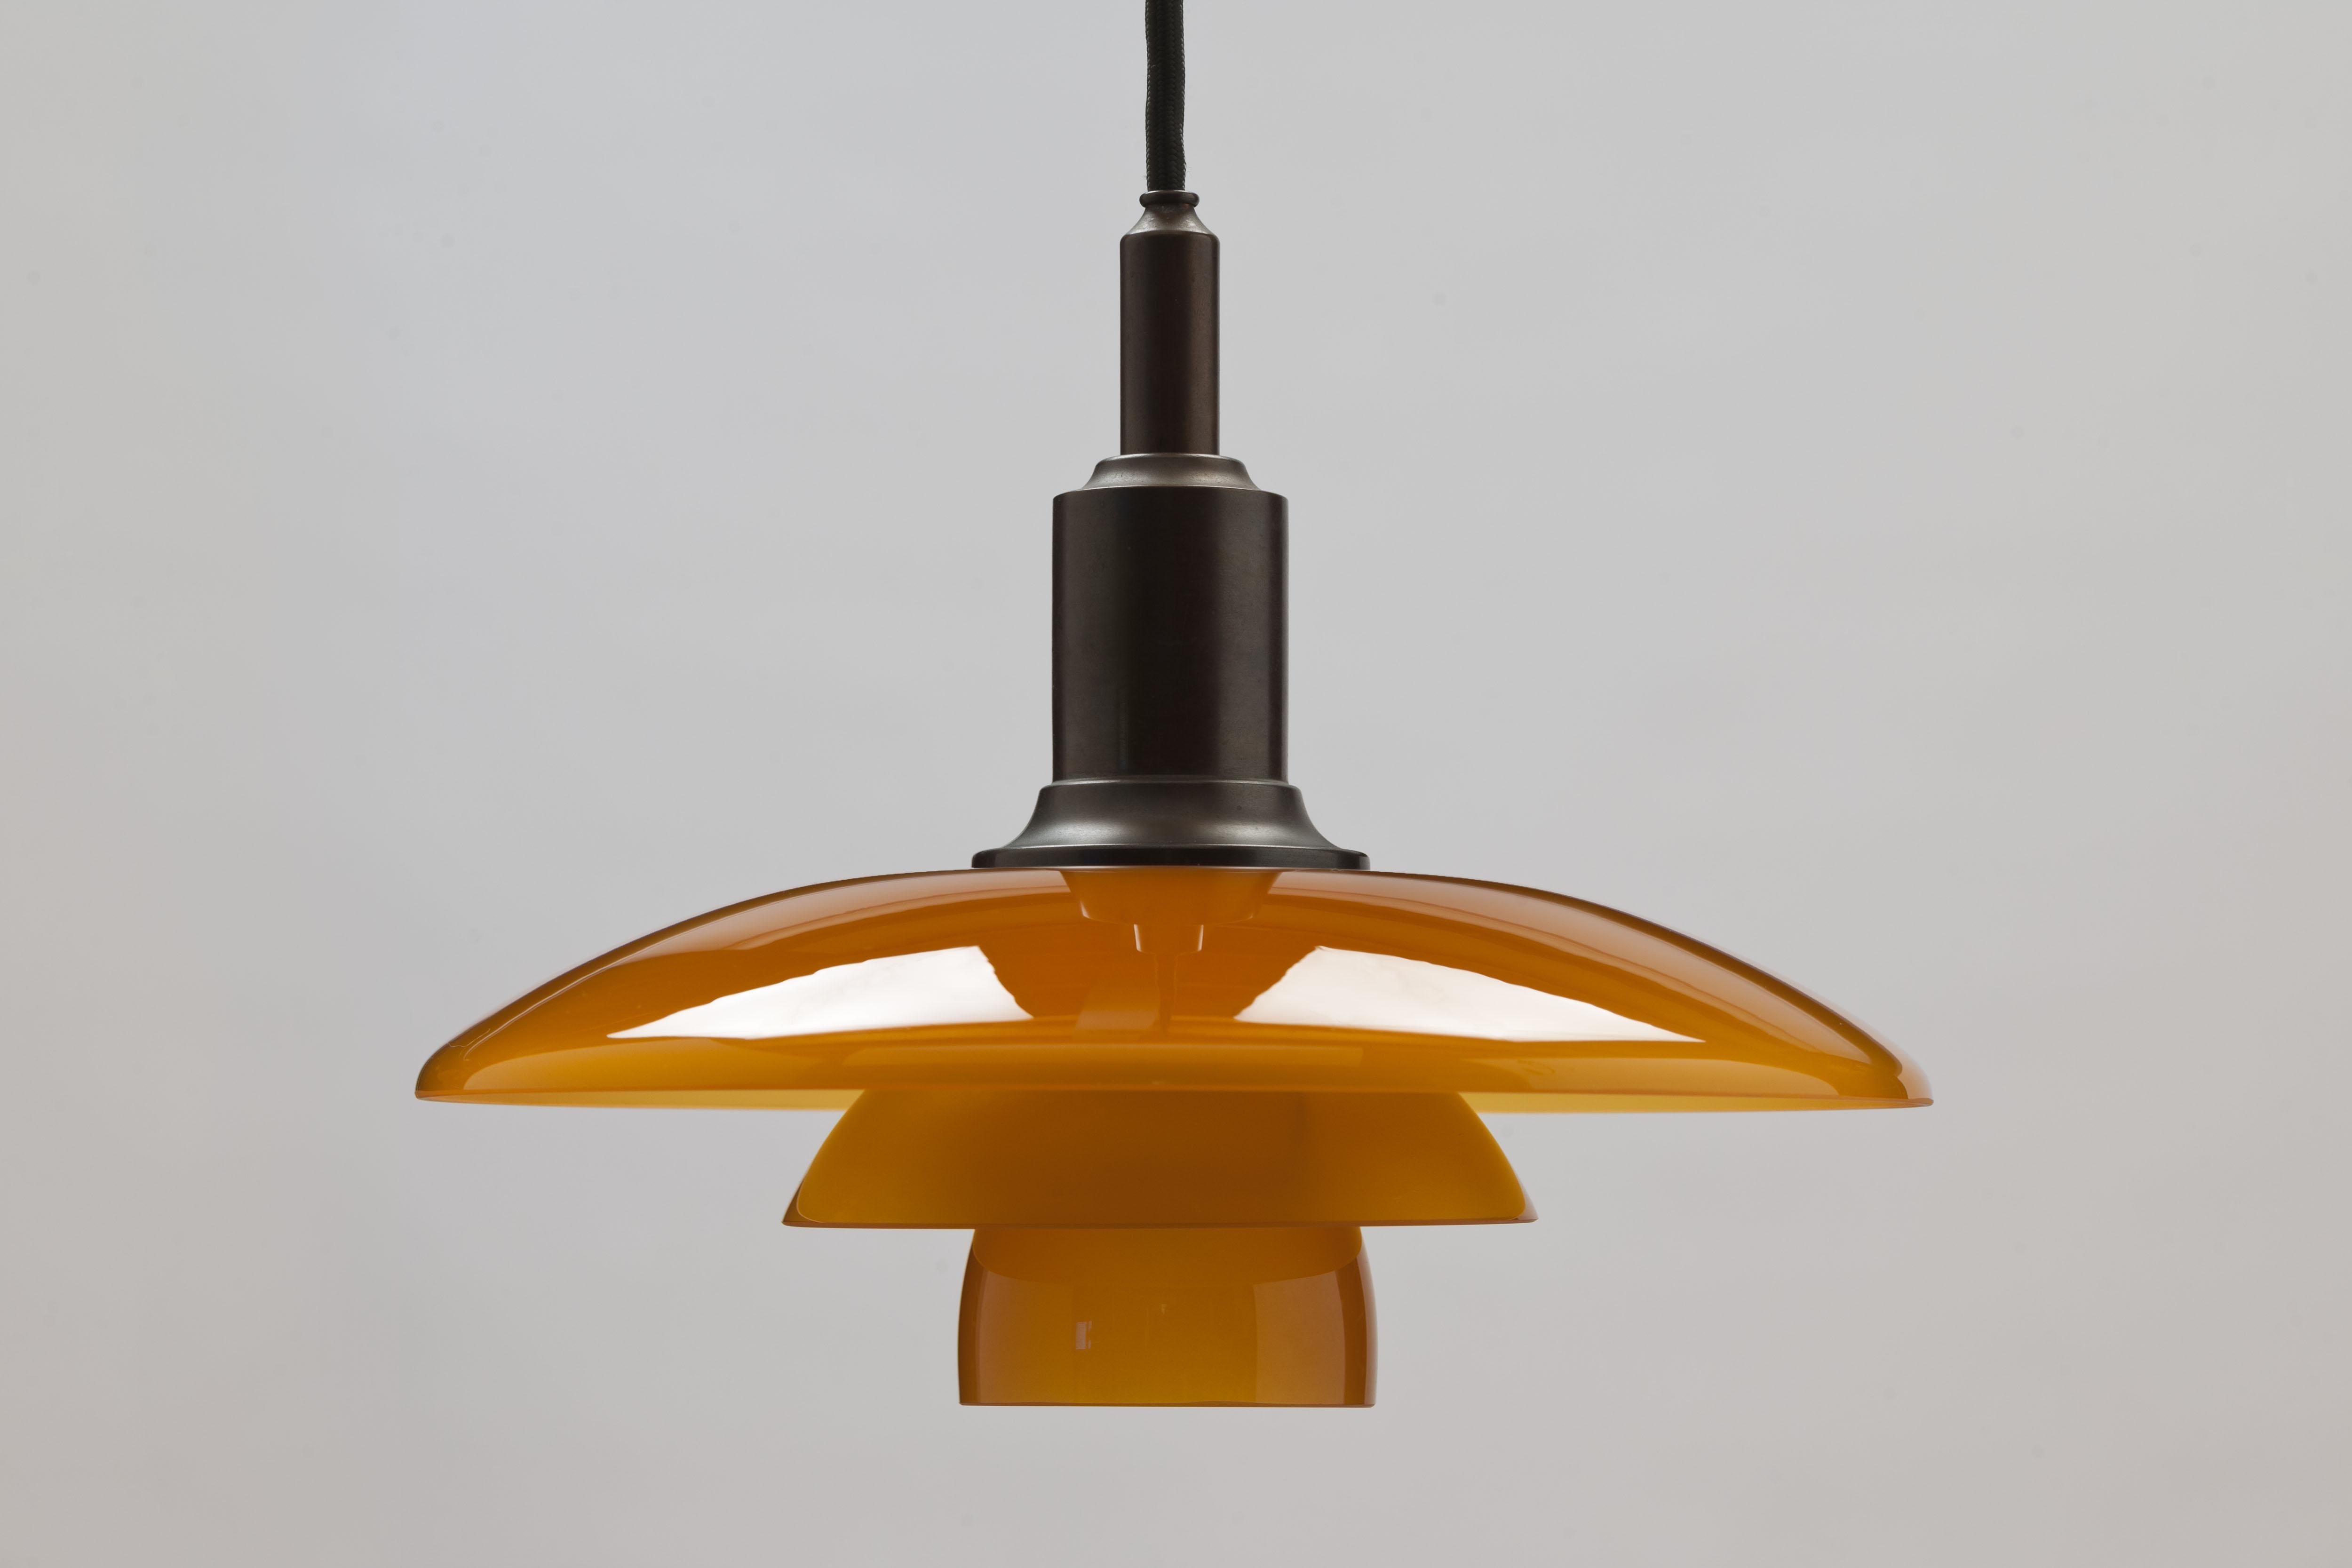 PH Amber glass shades on a PH3/2 browned brass pendant from the 1994 limited edition at the occasion of the 100th anniversary of the birth of Poul Henningsen.